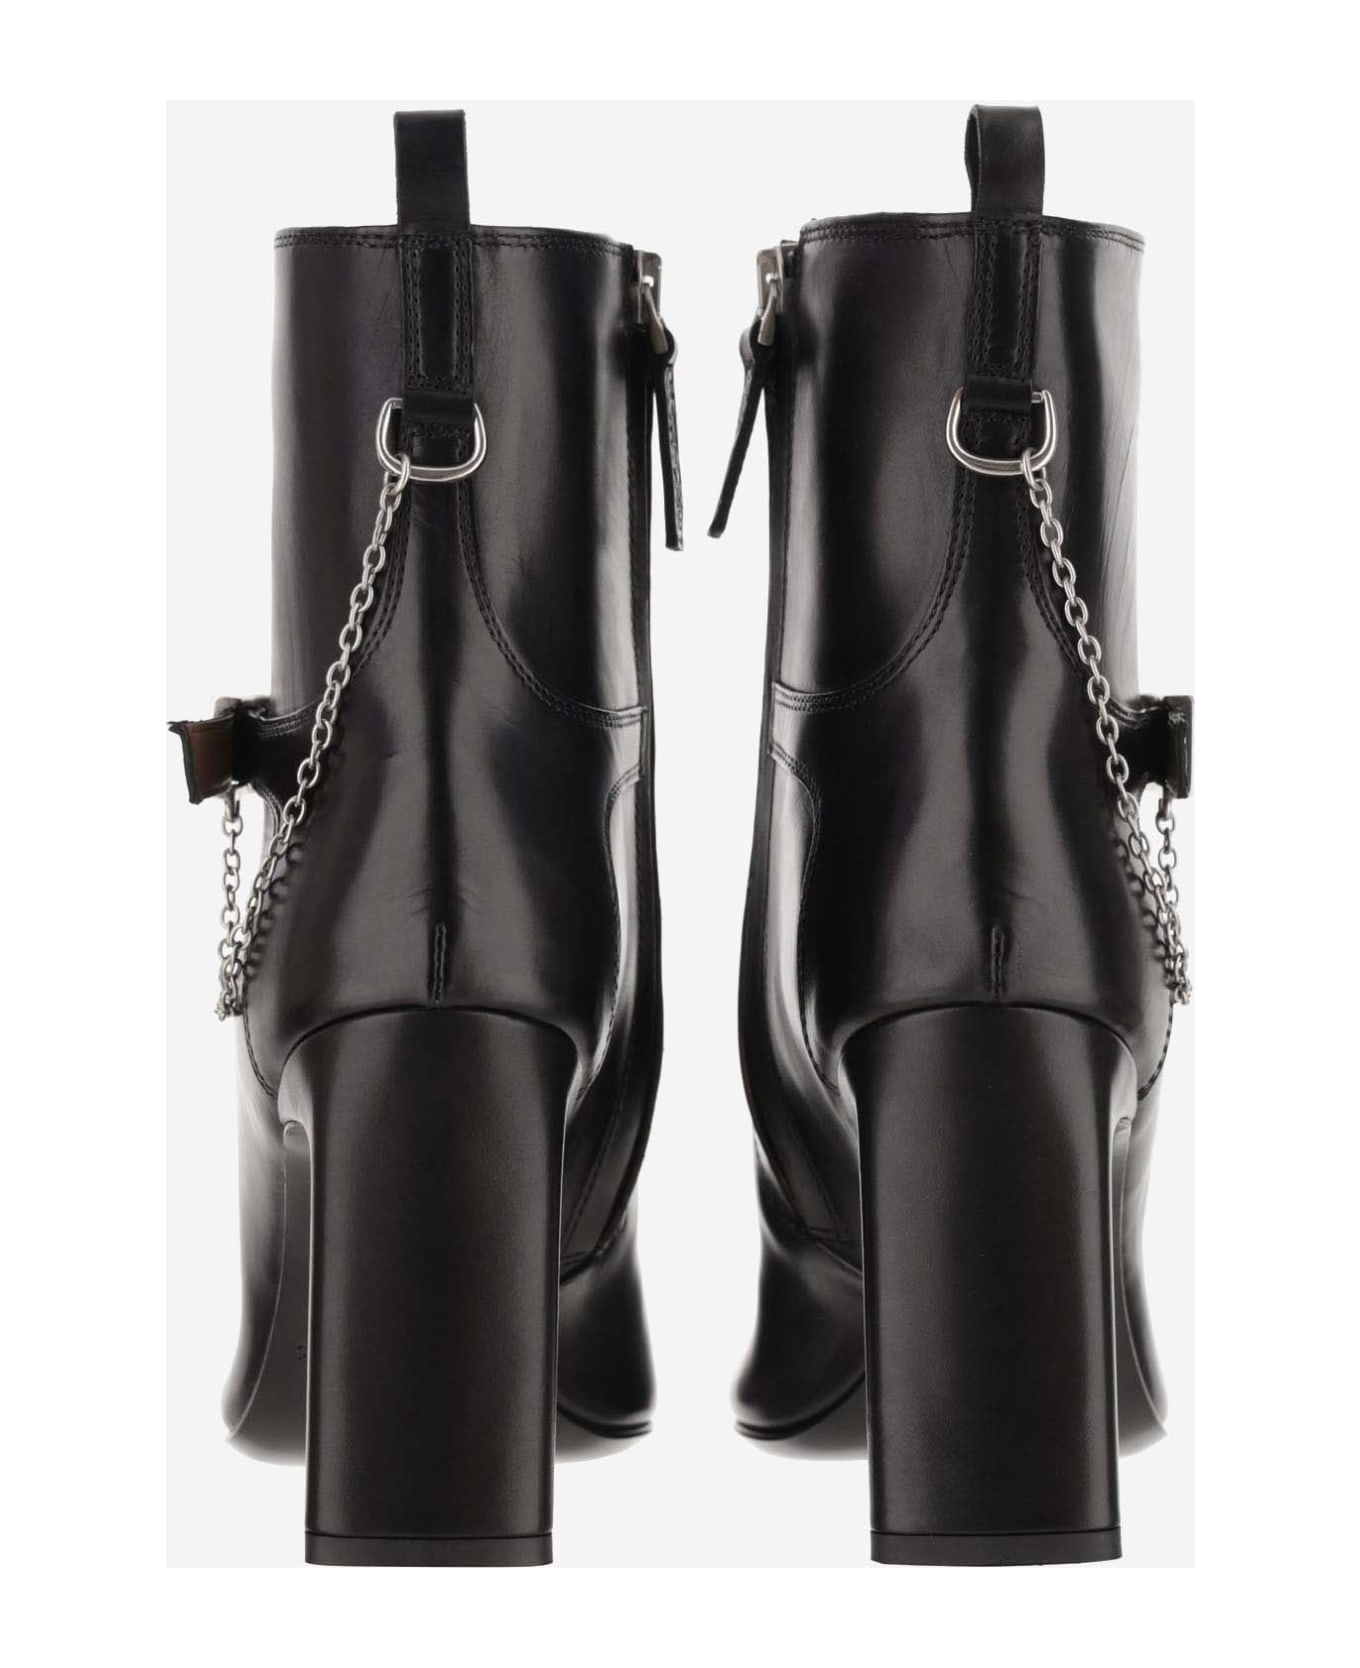 Sartore Leather Ankle Boots With Chain - Black